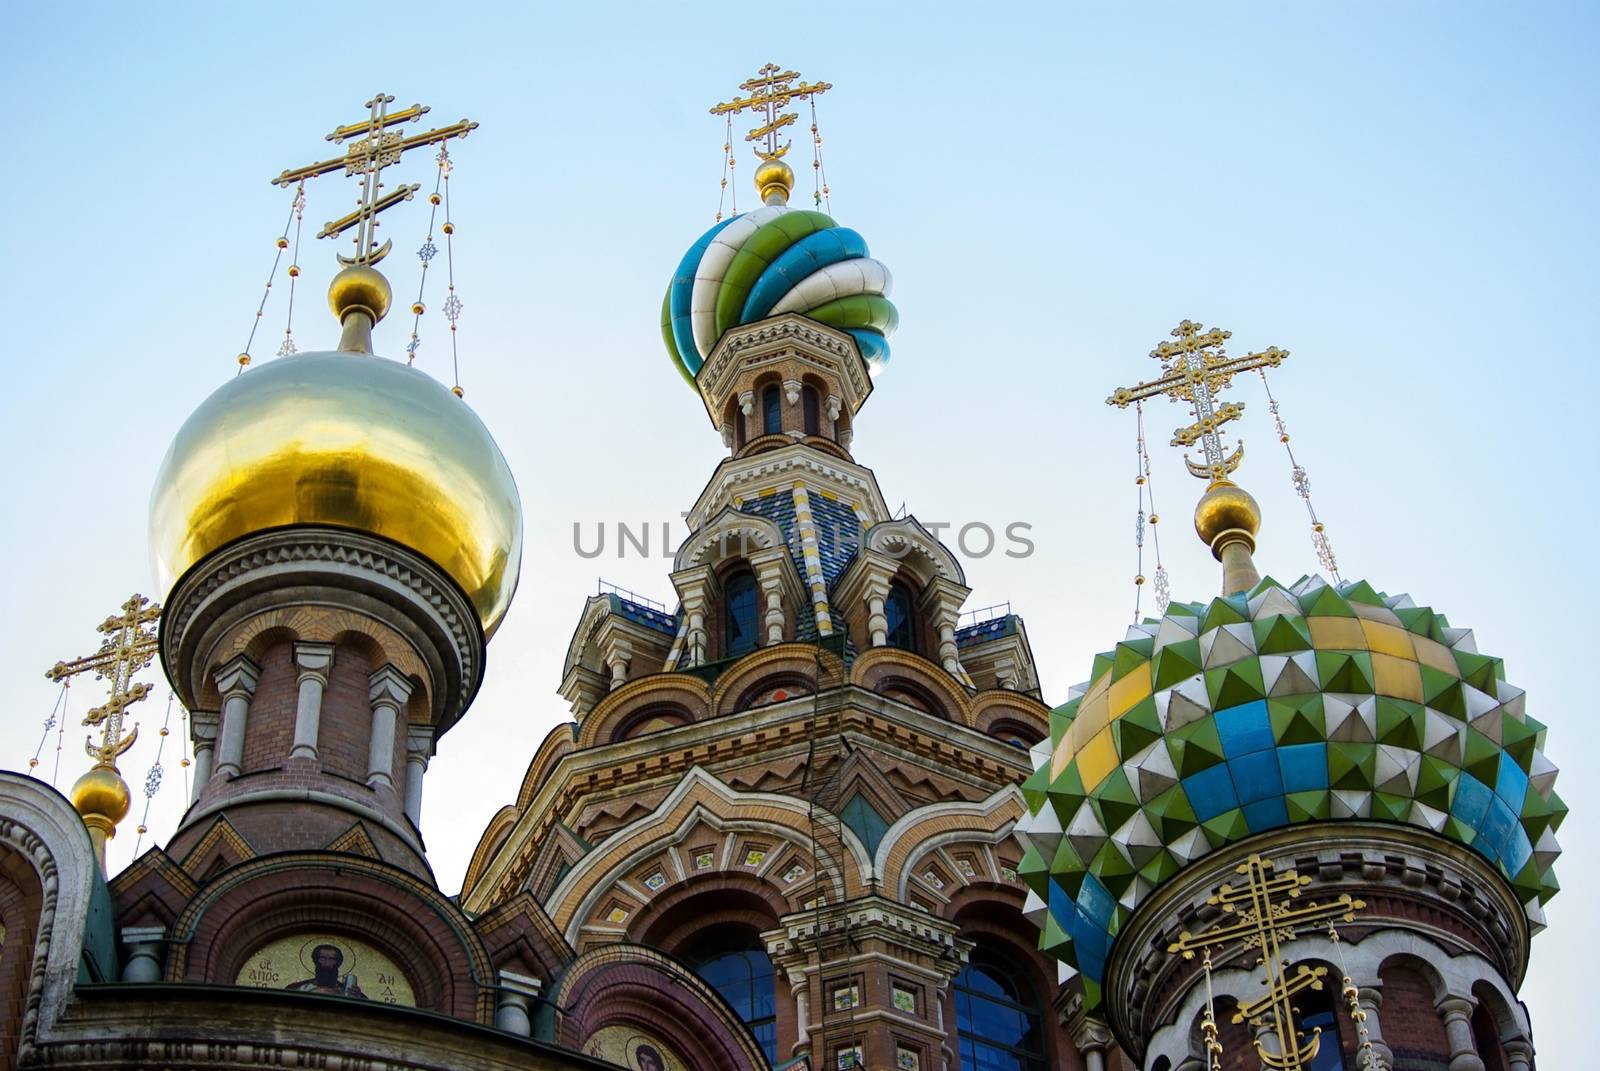 Detail of the Our Saviour on Spilled Blood cathedral in Saint-Petersburg, Russia by evolutionnow